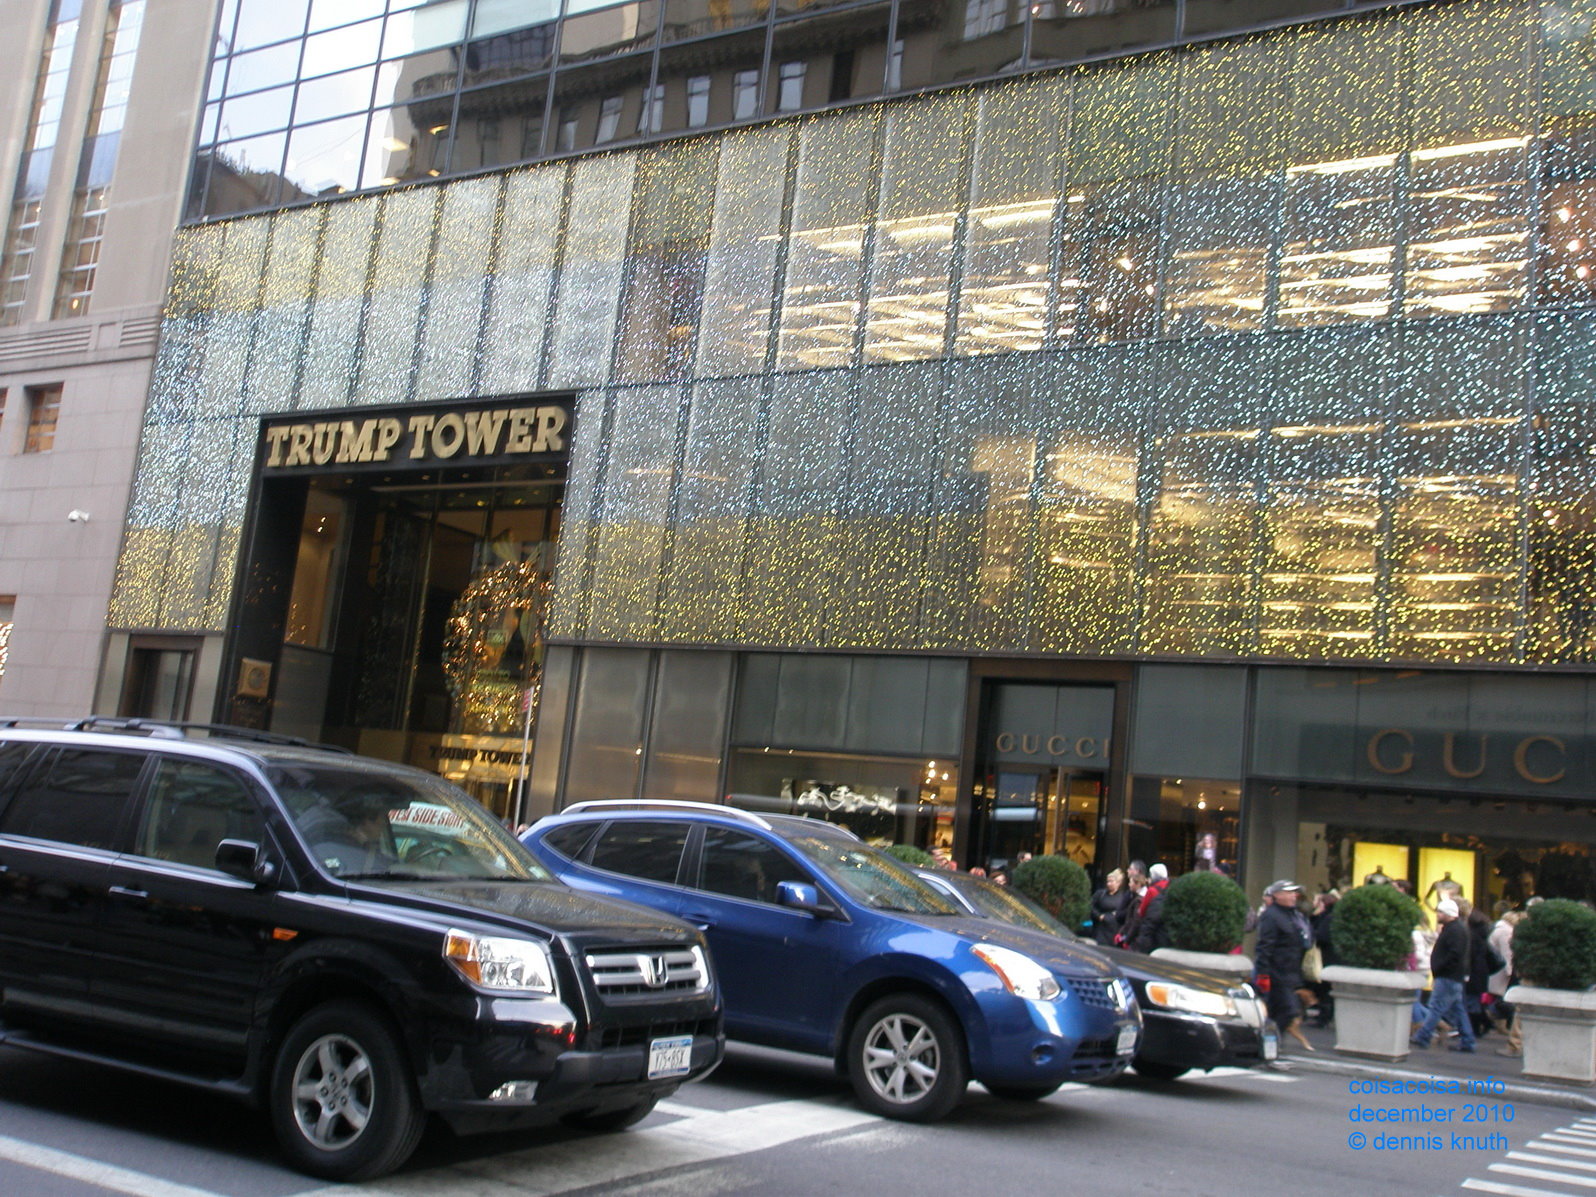 Lisette wanted to see Trump Tower in New York